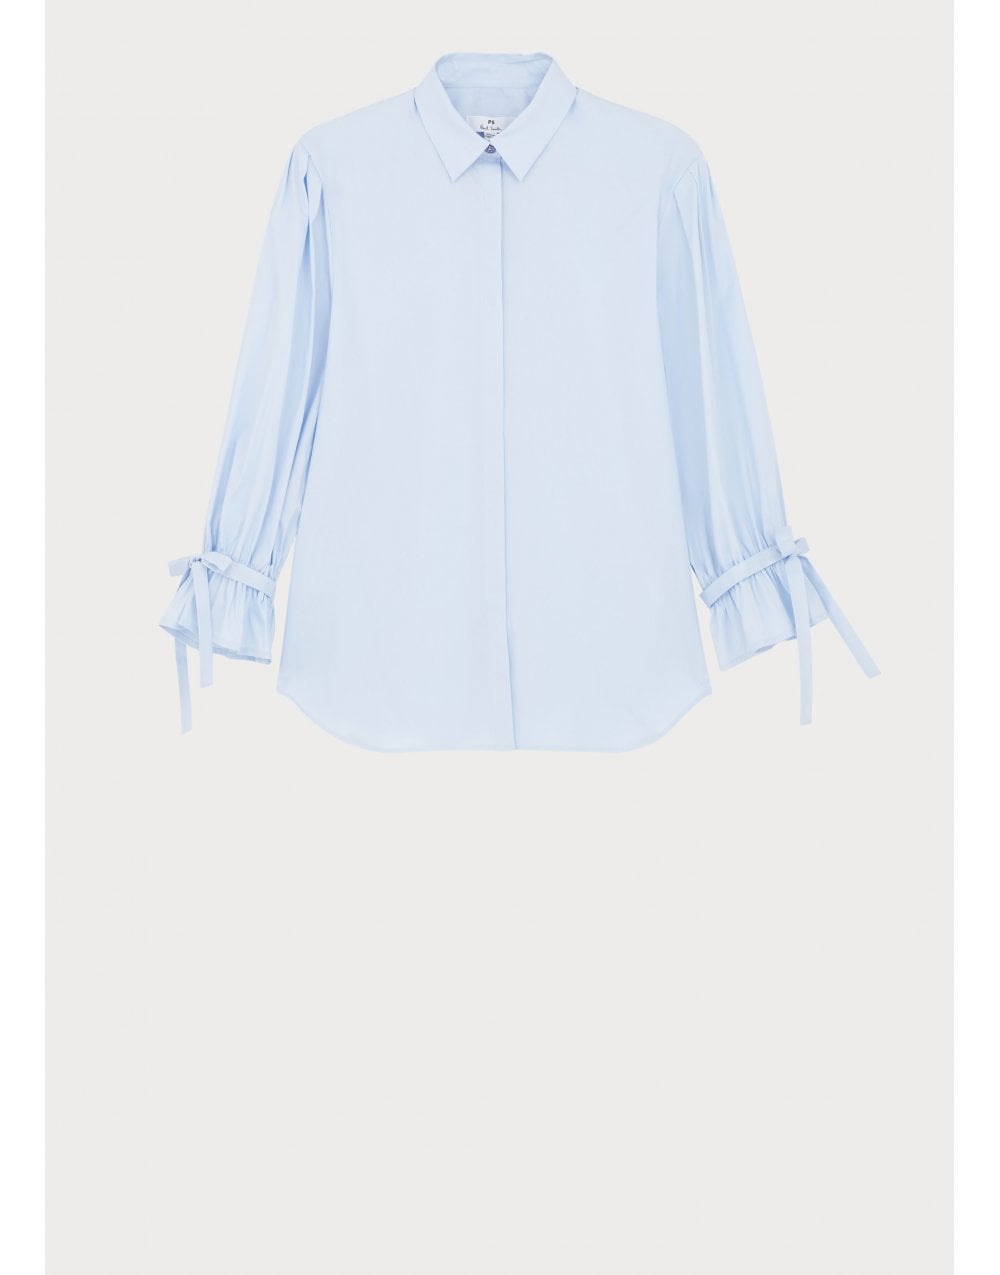 Paul Smith Blue Tie Sleeves Button Down Shirt 